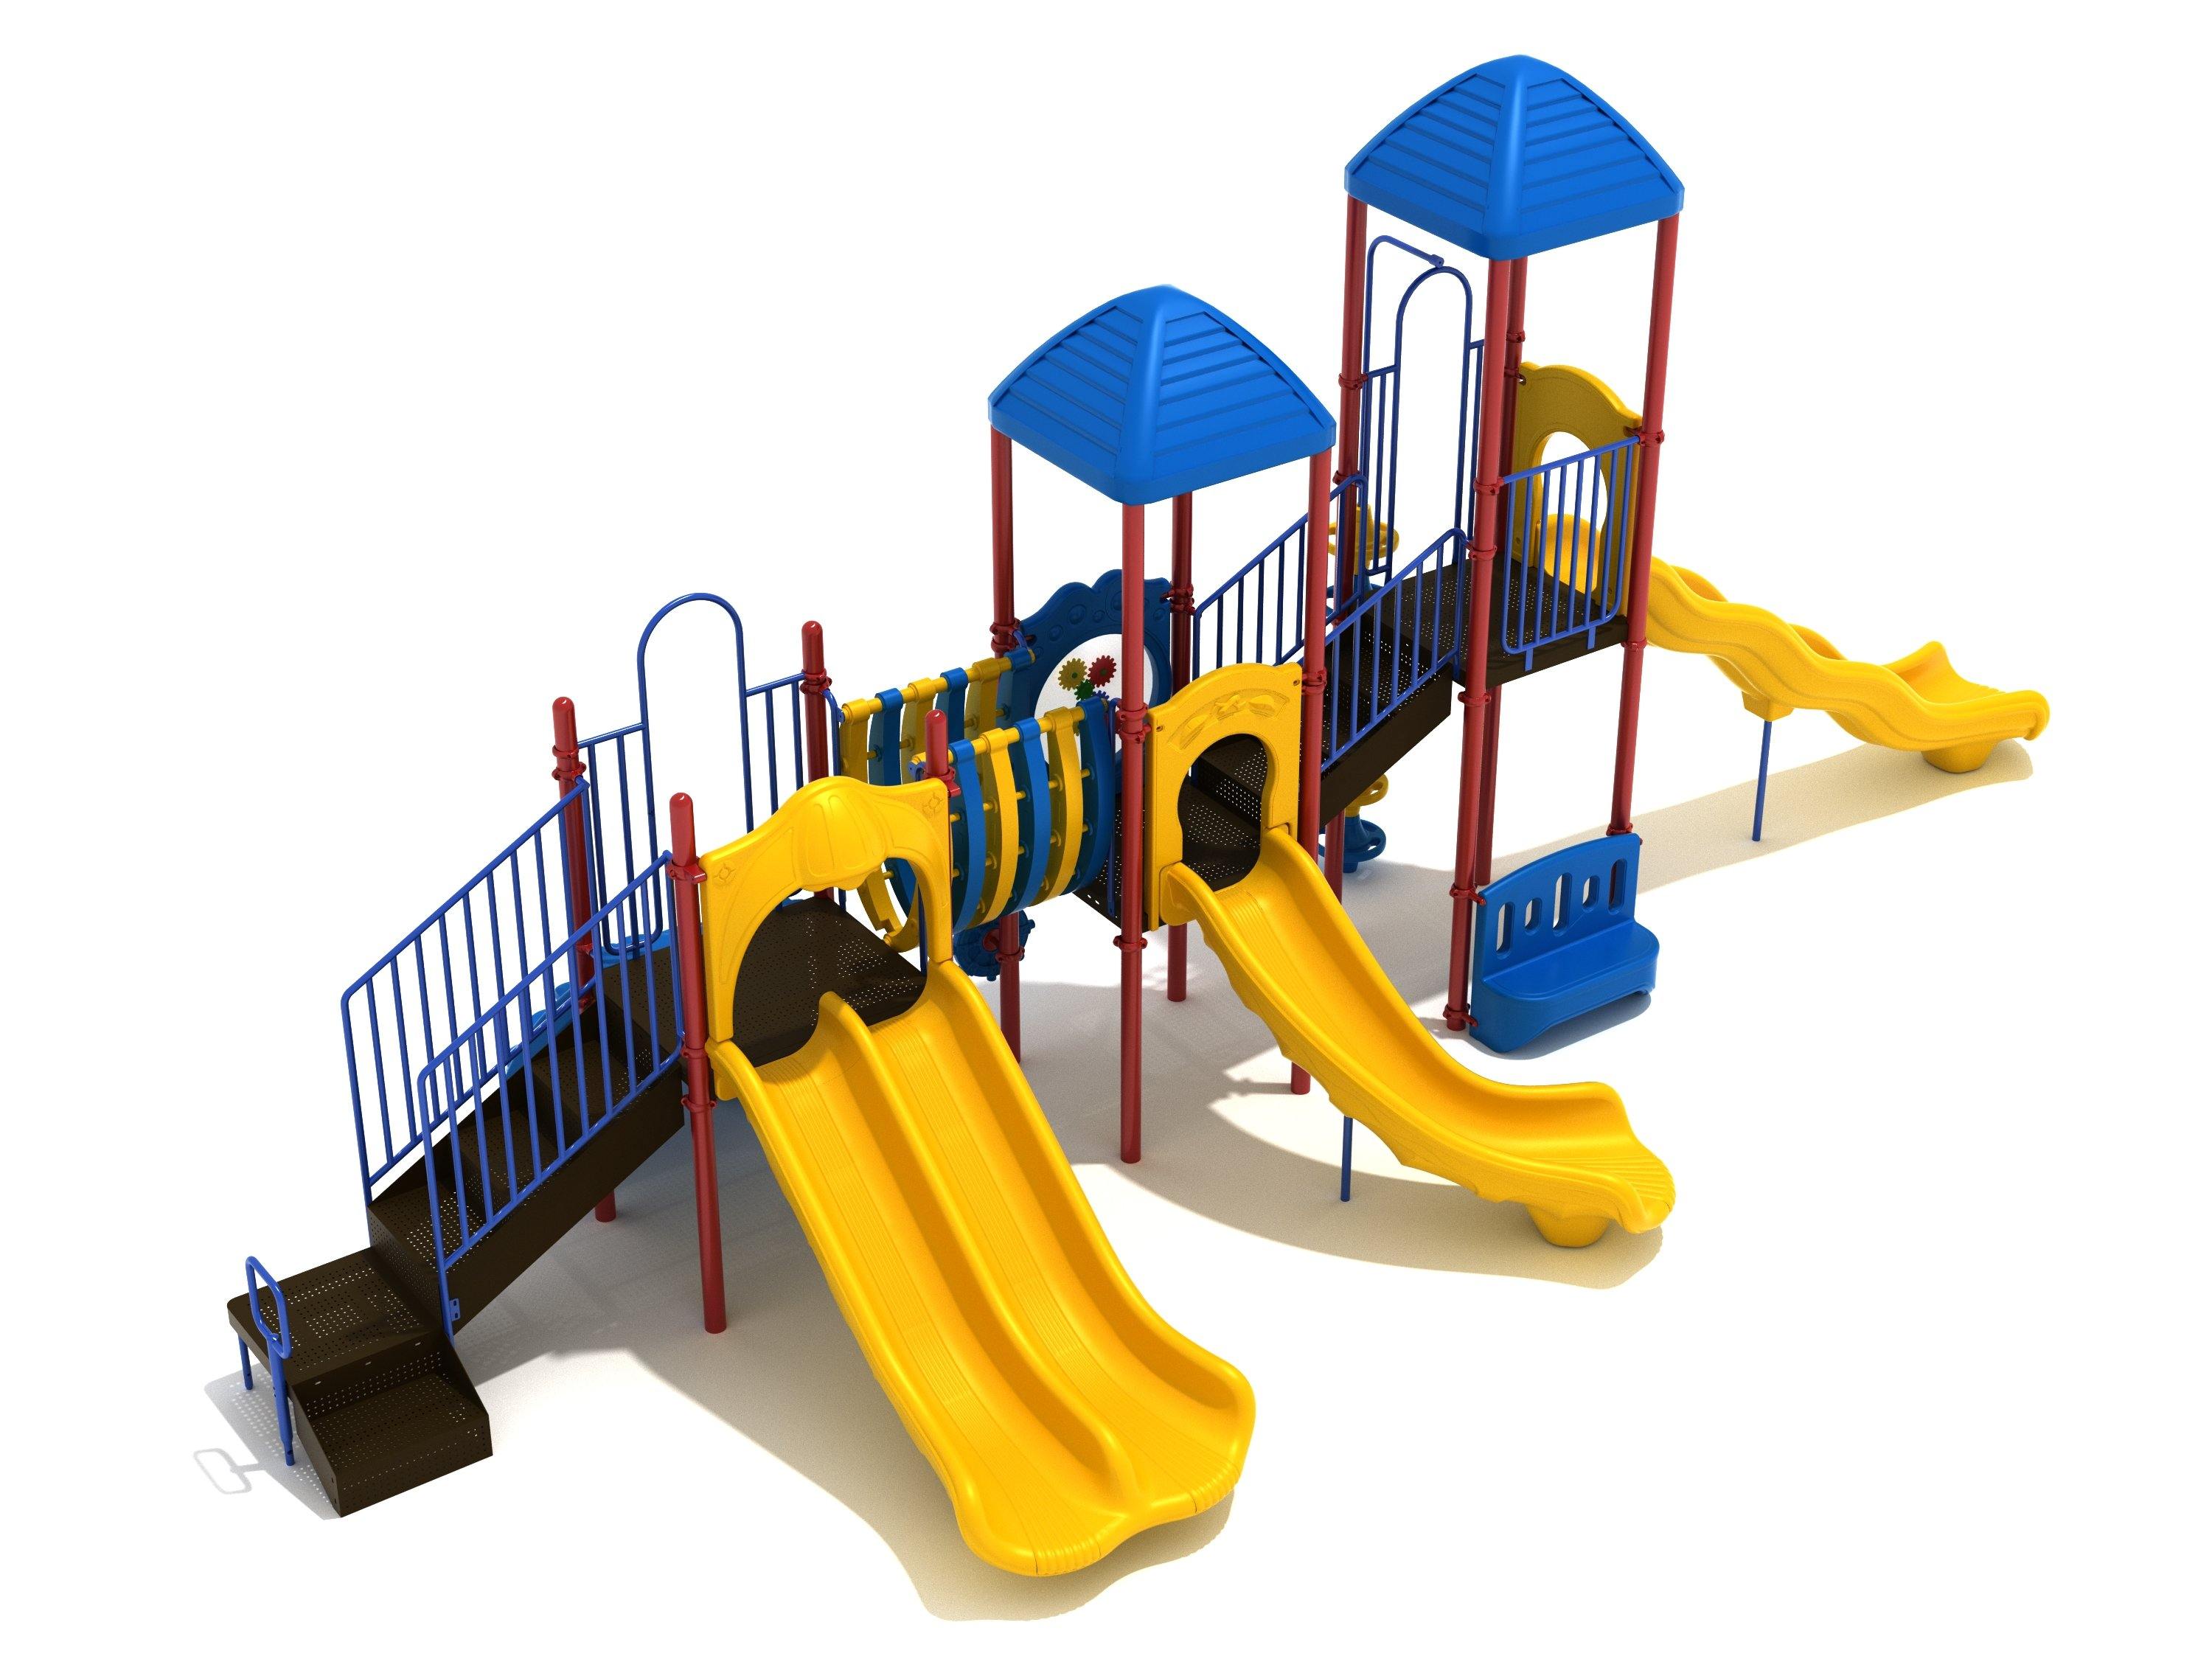 Ladera Heights - River City Play Systems